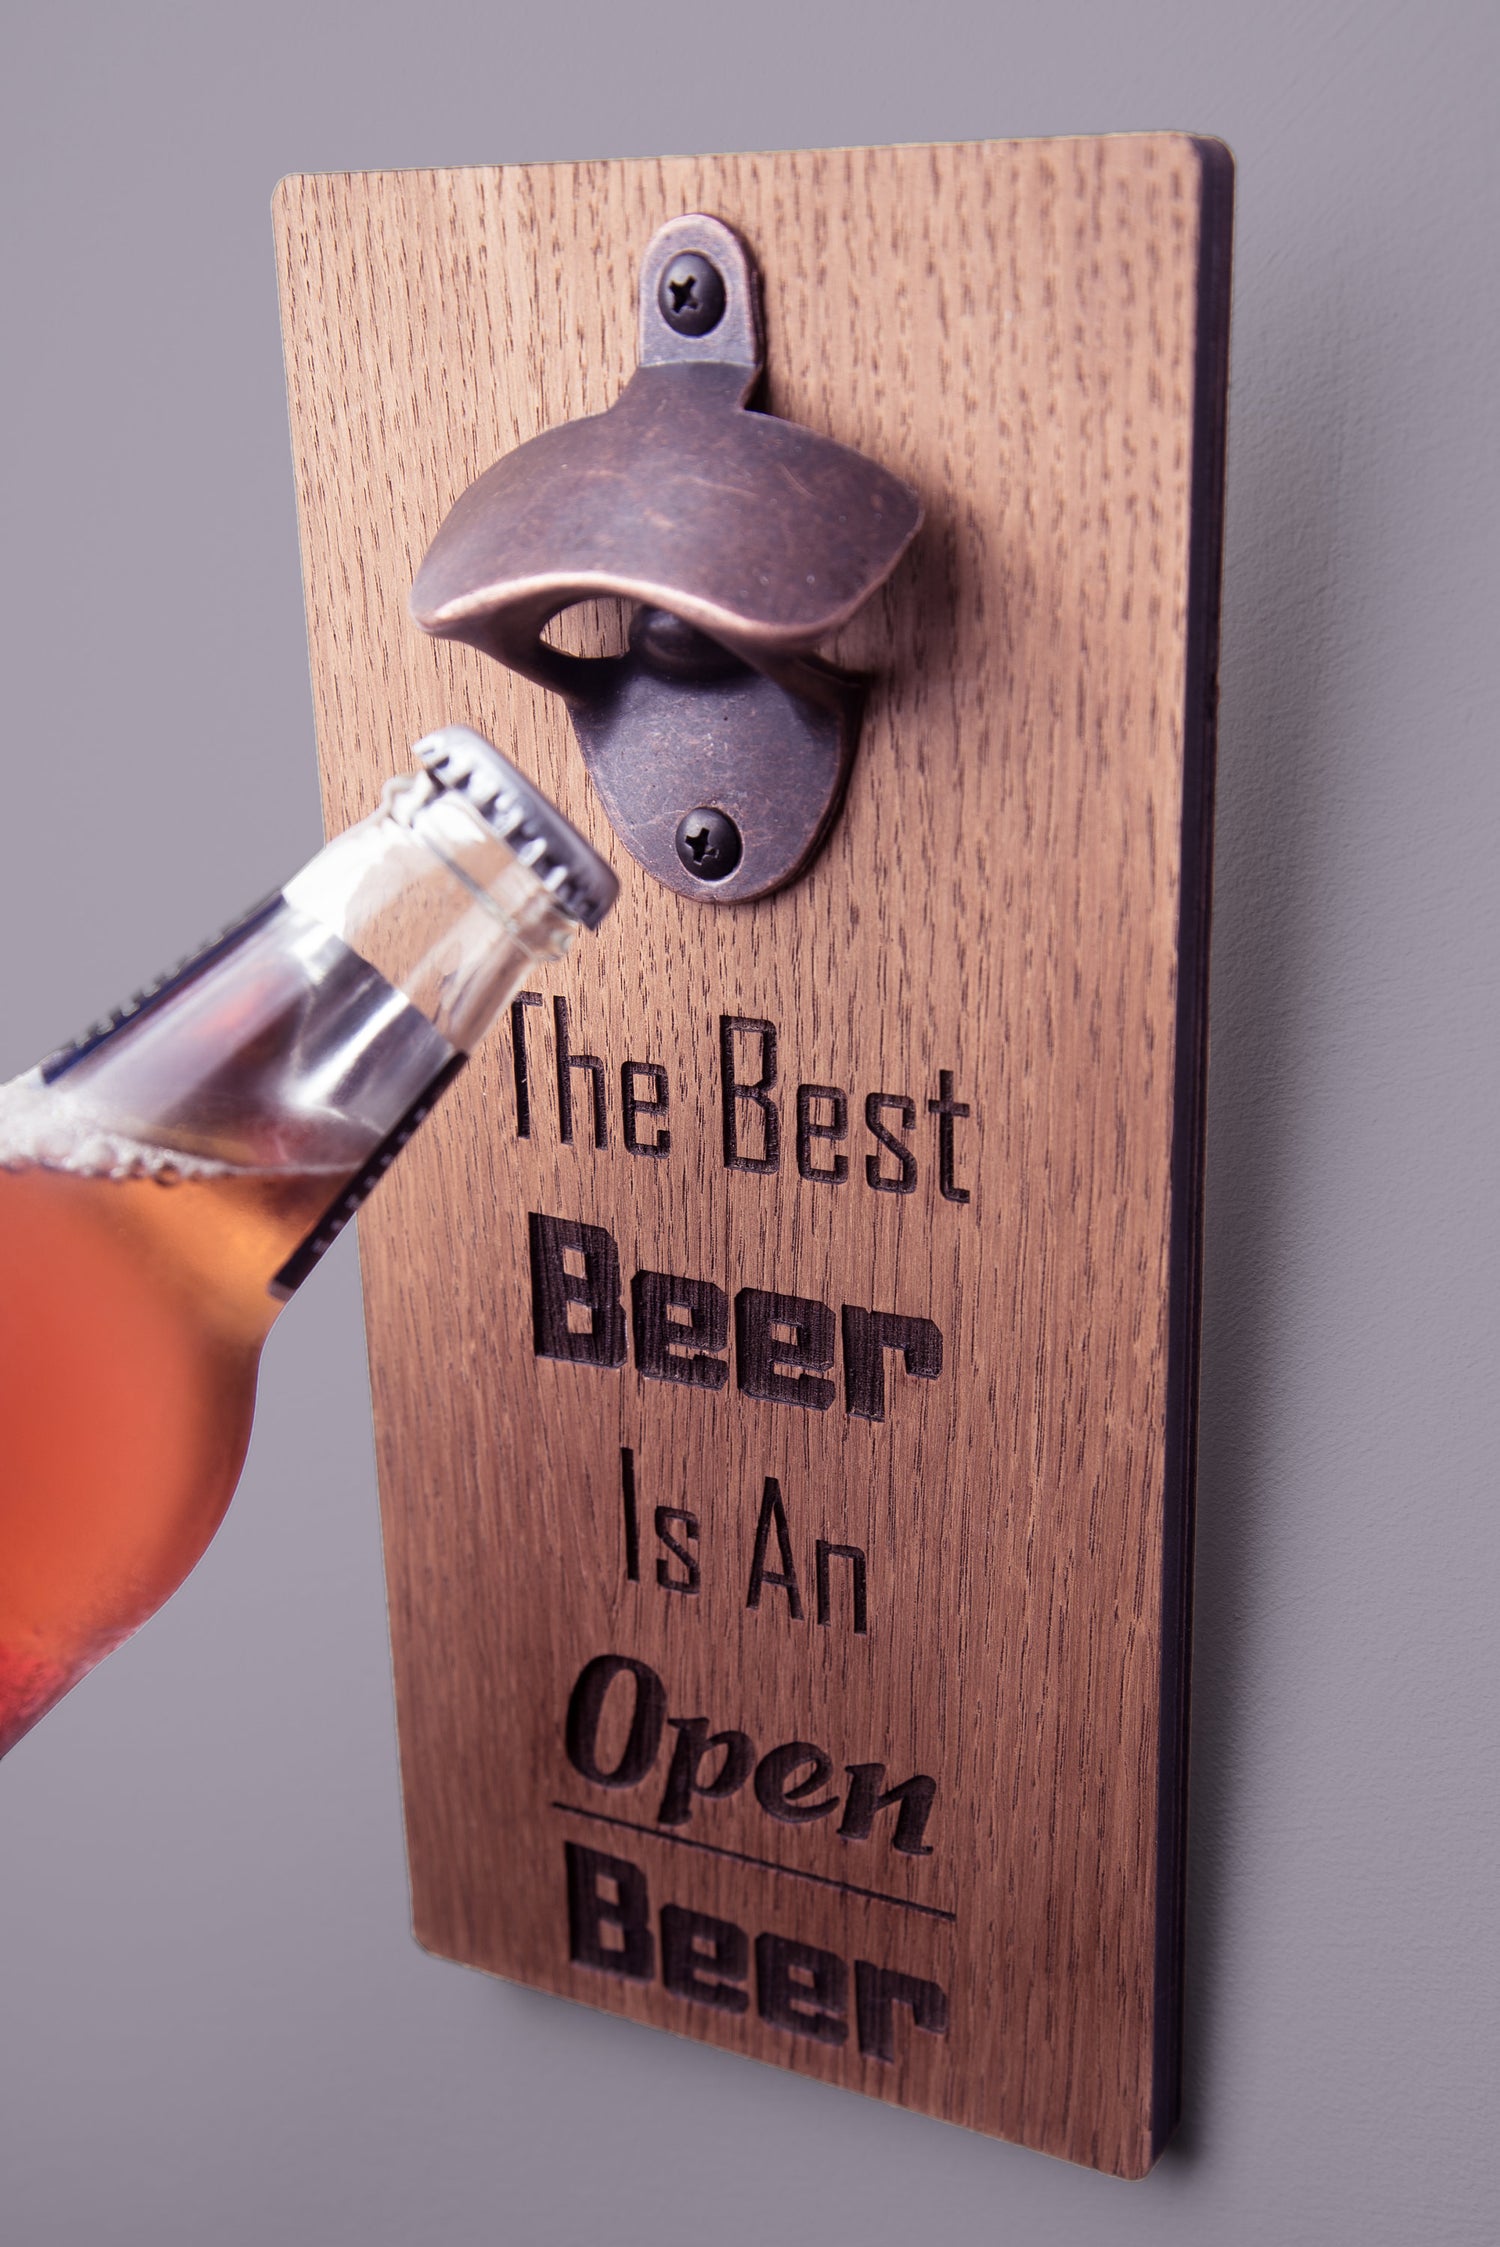 The Best Beer Is An Open Beer Bottle Opener | Gift Ideas For Him | Fathers Day Gift | New Home Gift | Man Cave Gift | Gift Ideas For Her